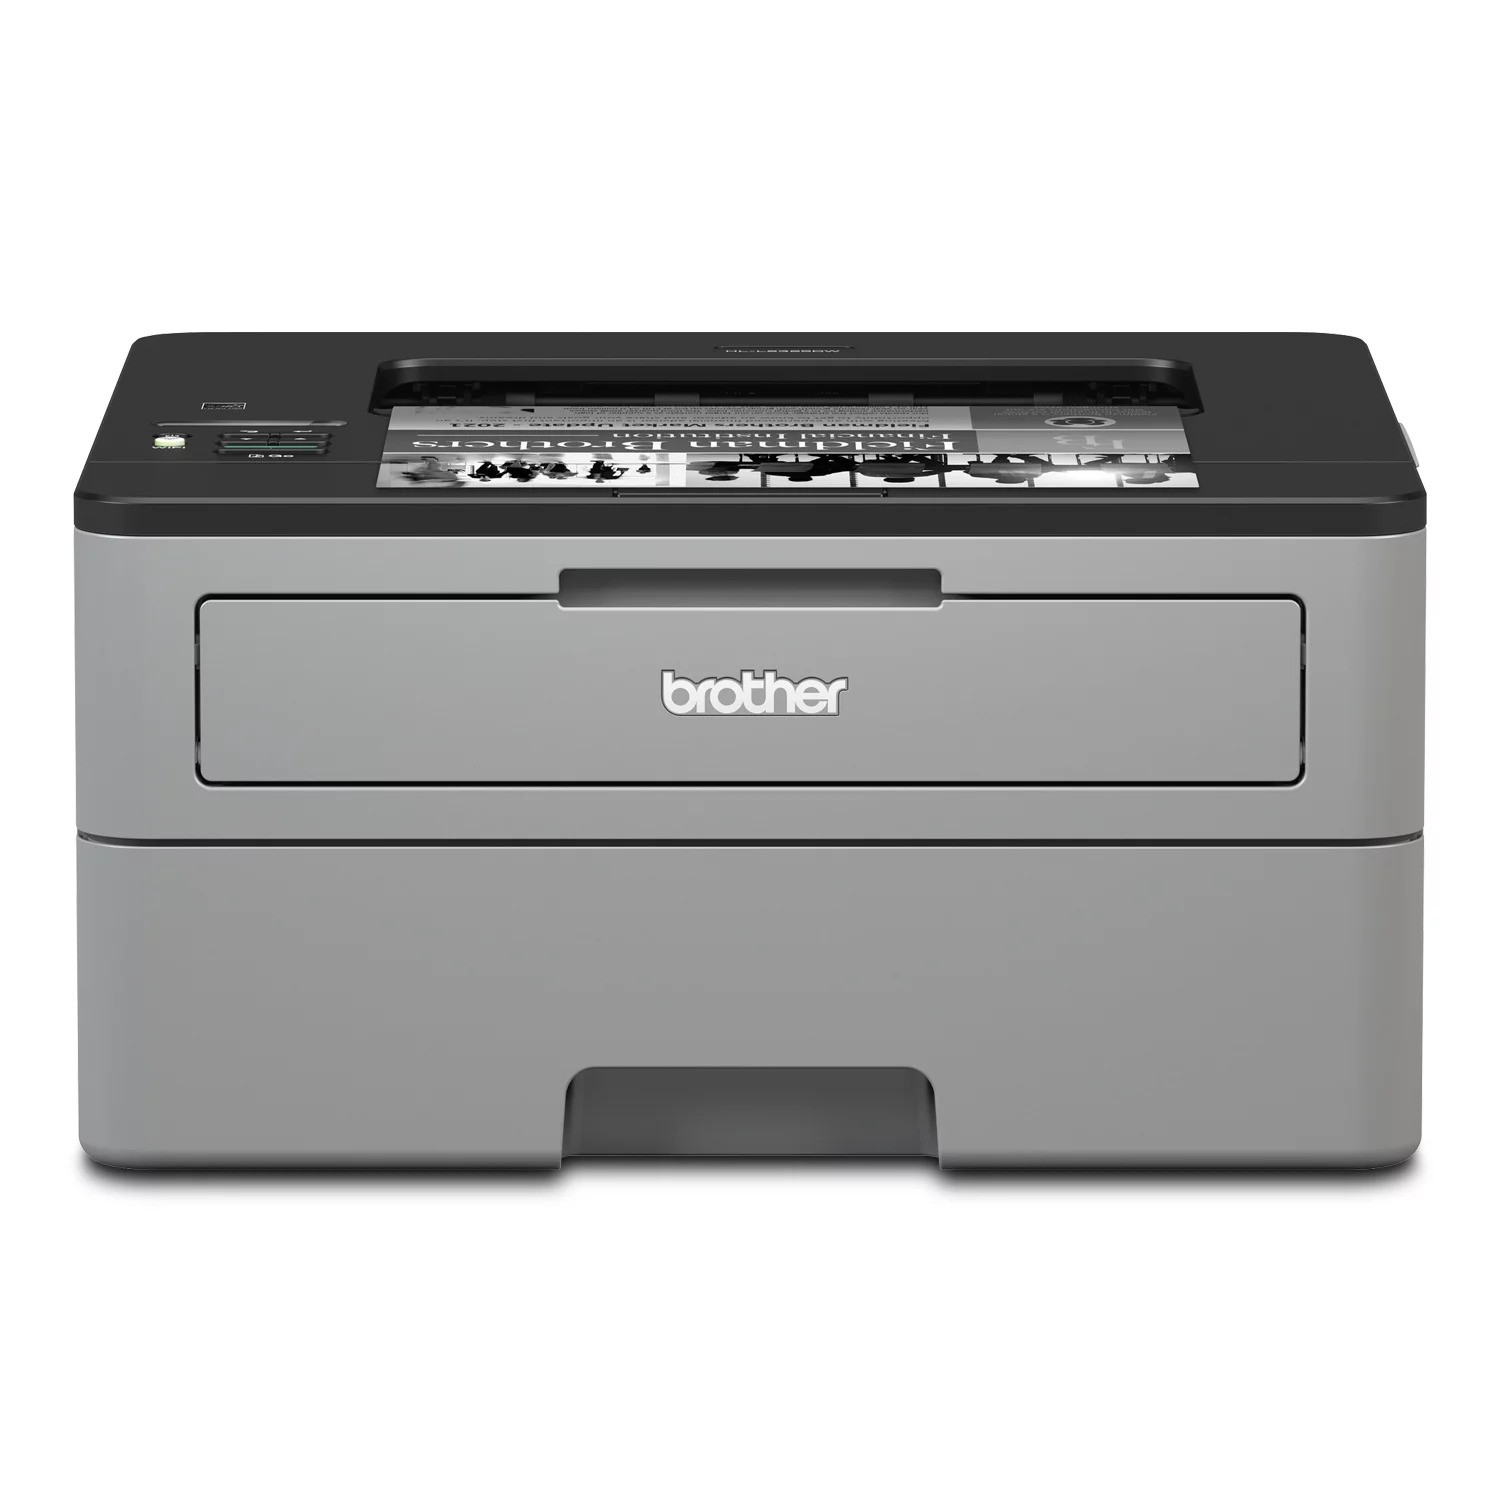 How To Find Wps Pin For Brother Printer